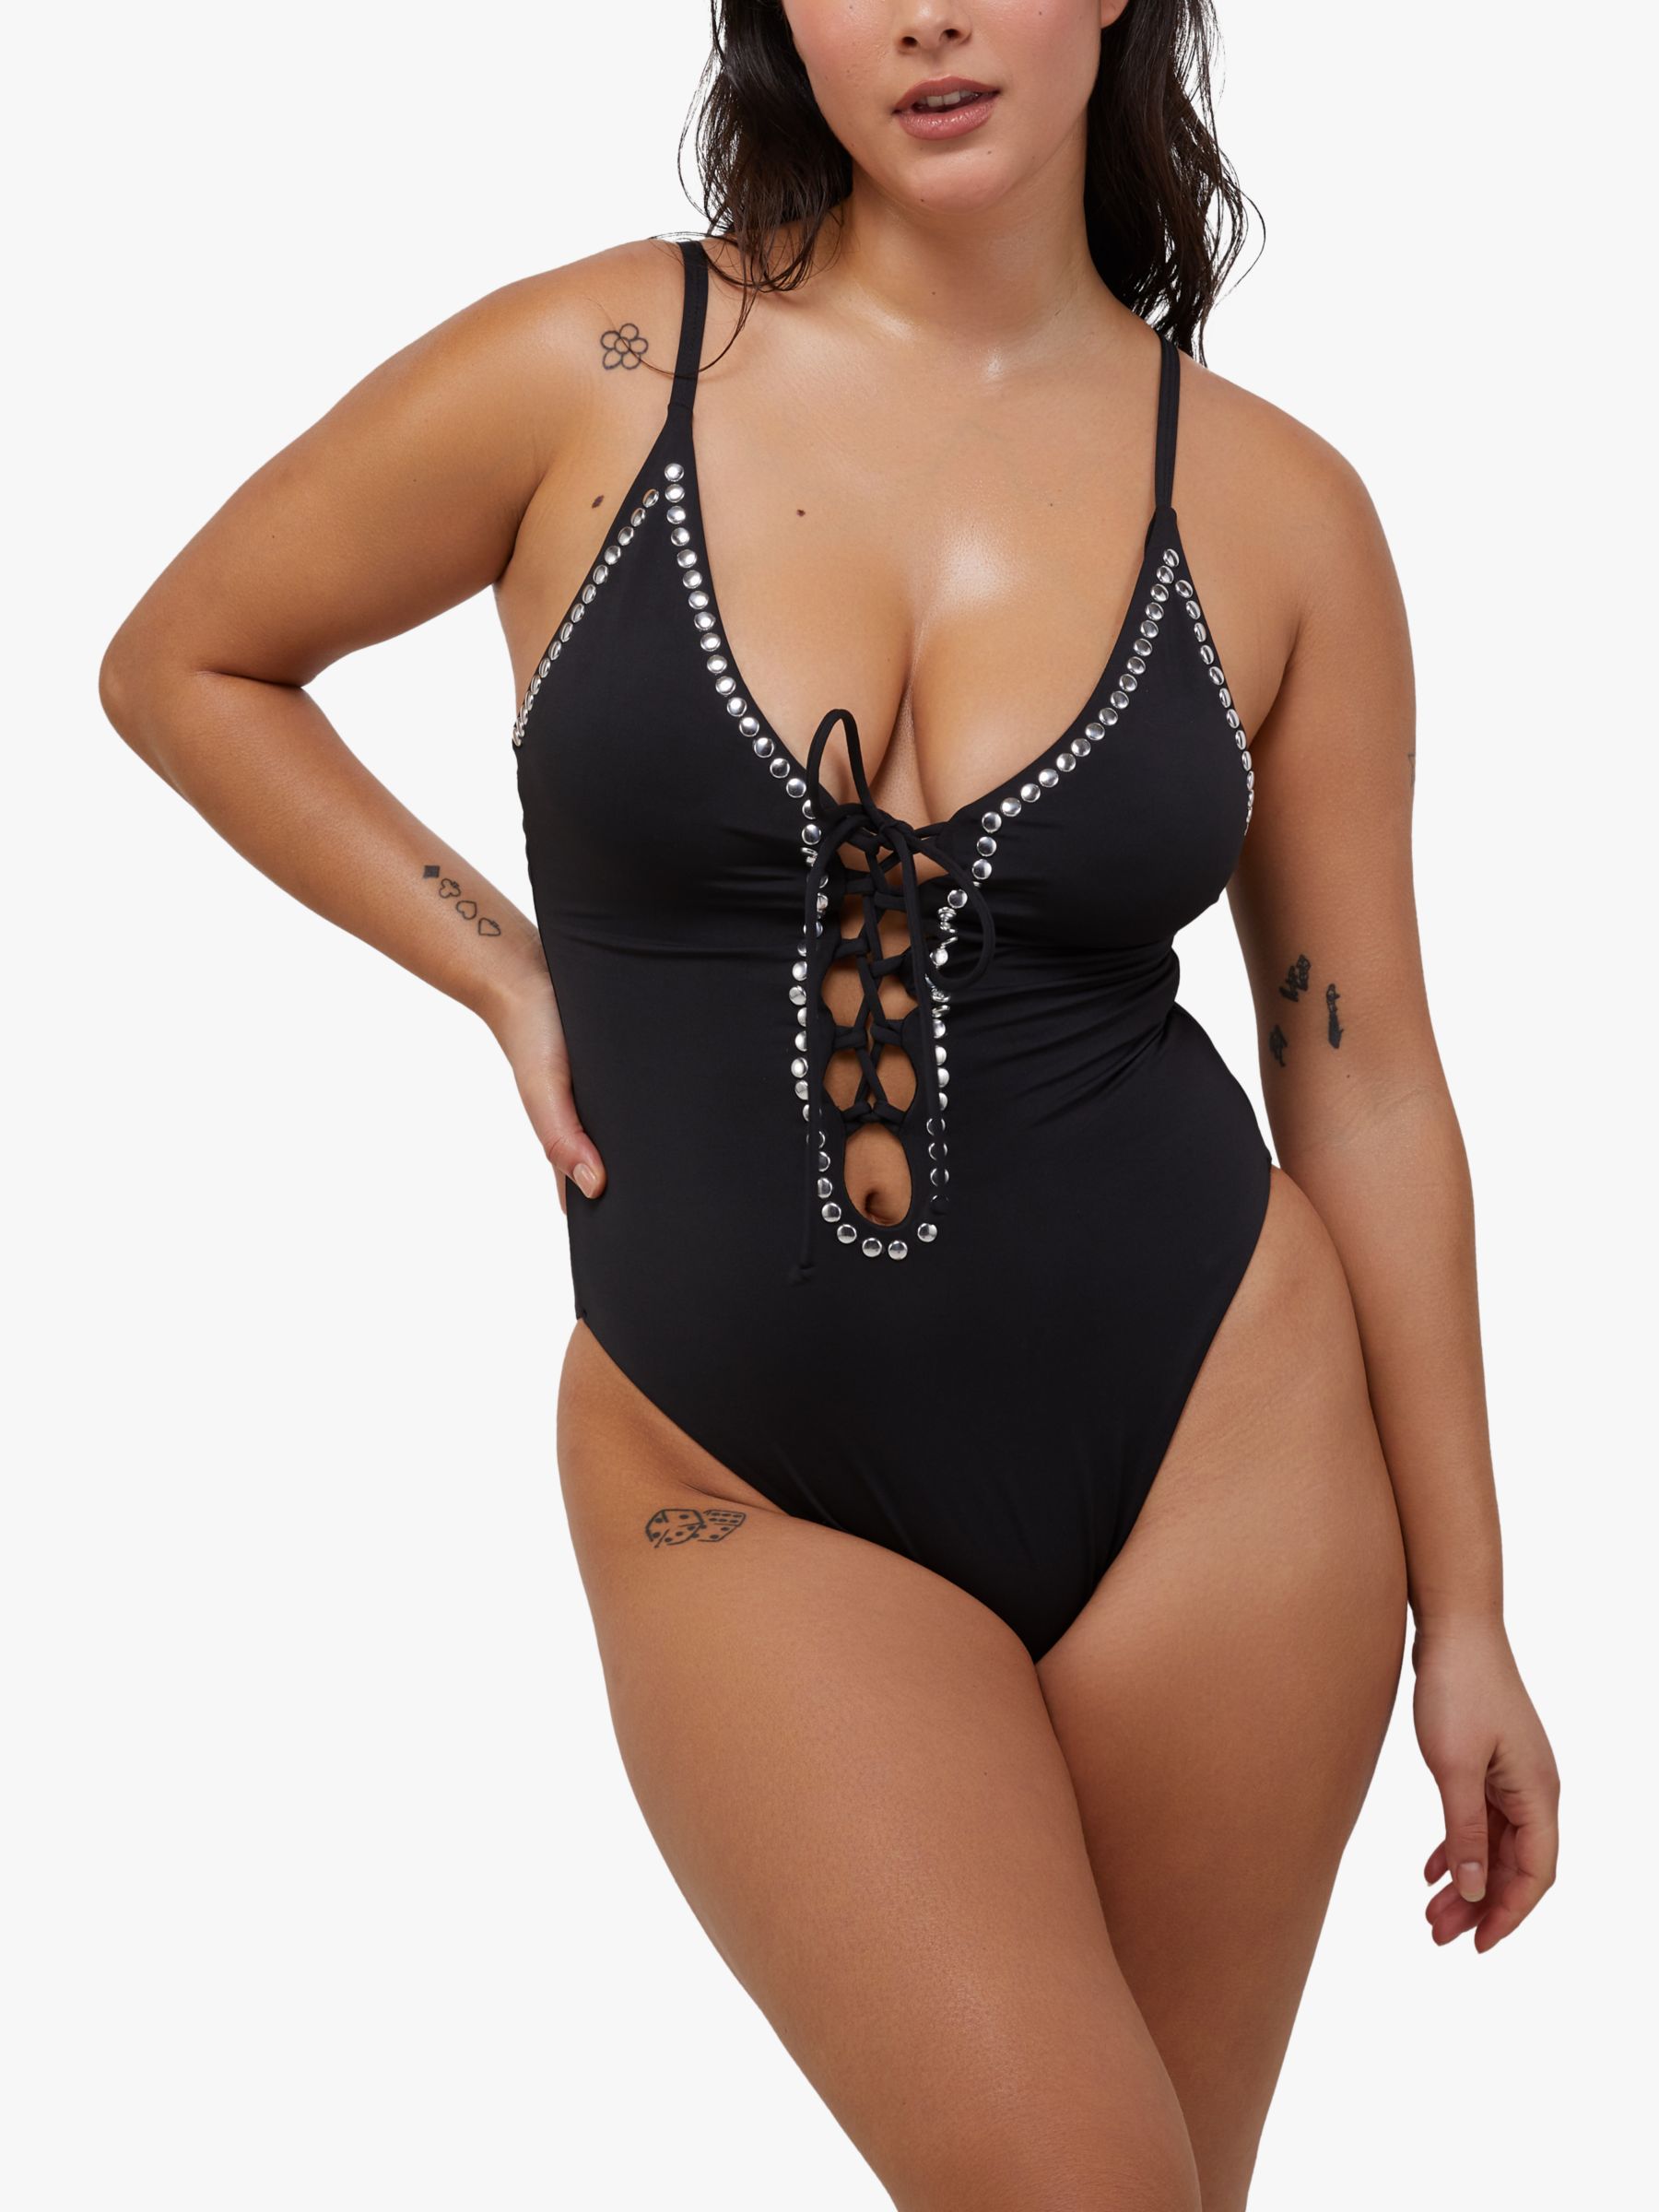 Wolf & Whistle Gabrielle Fuller Bust Eco Studded Lace Up Swimsuit, Black, 32B/C